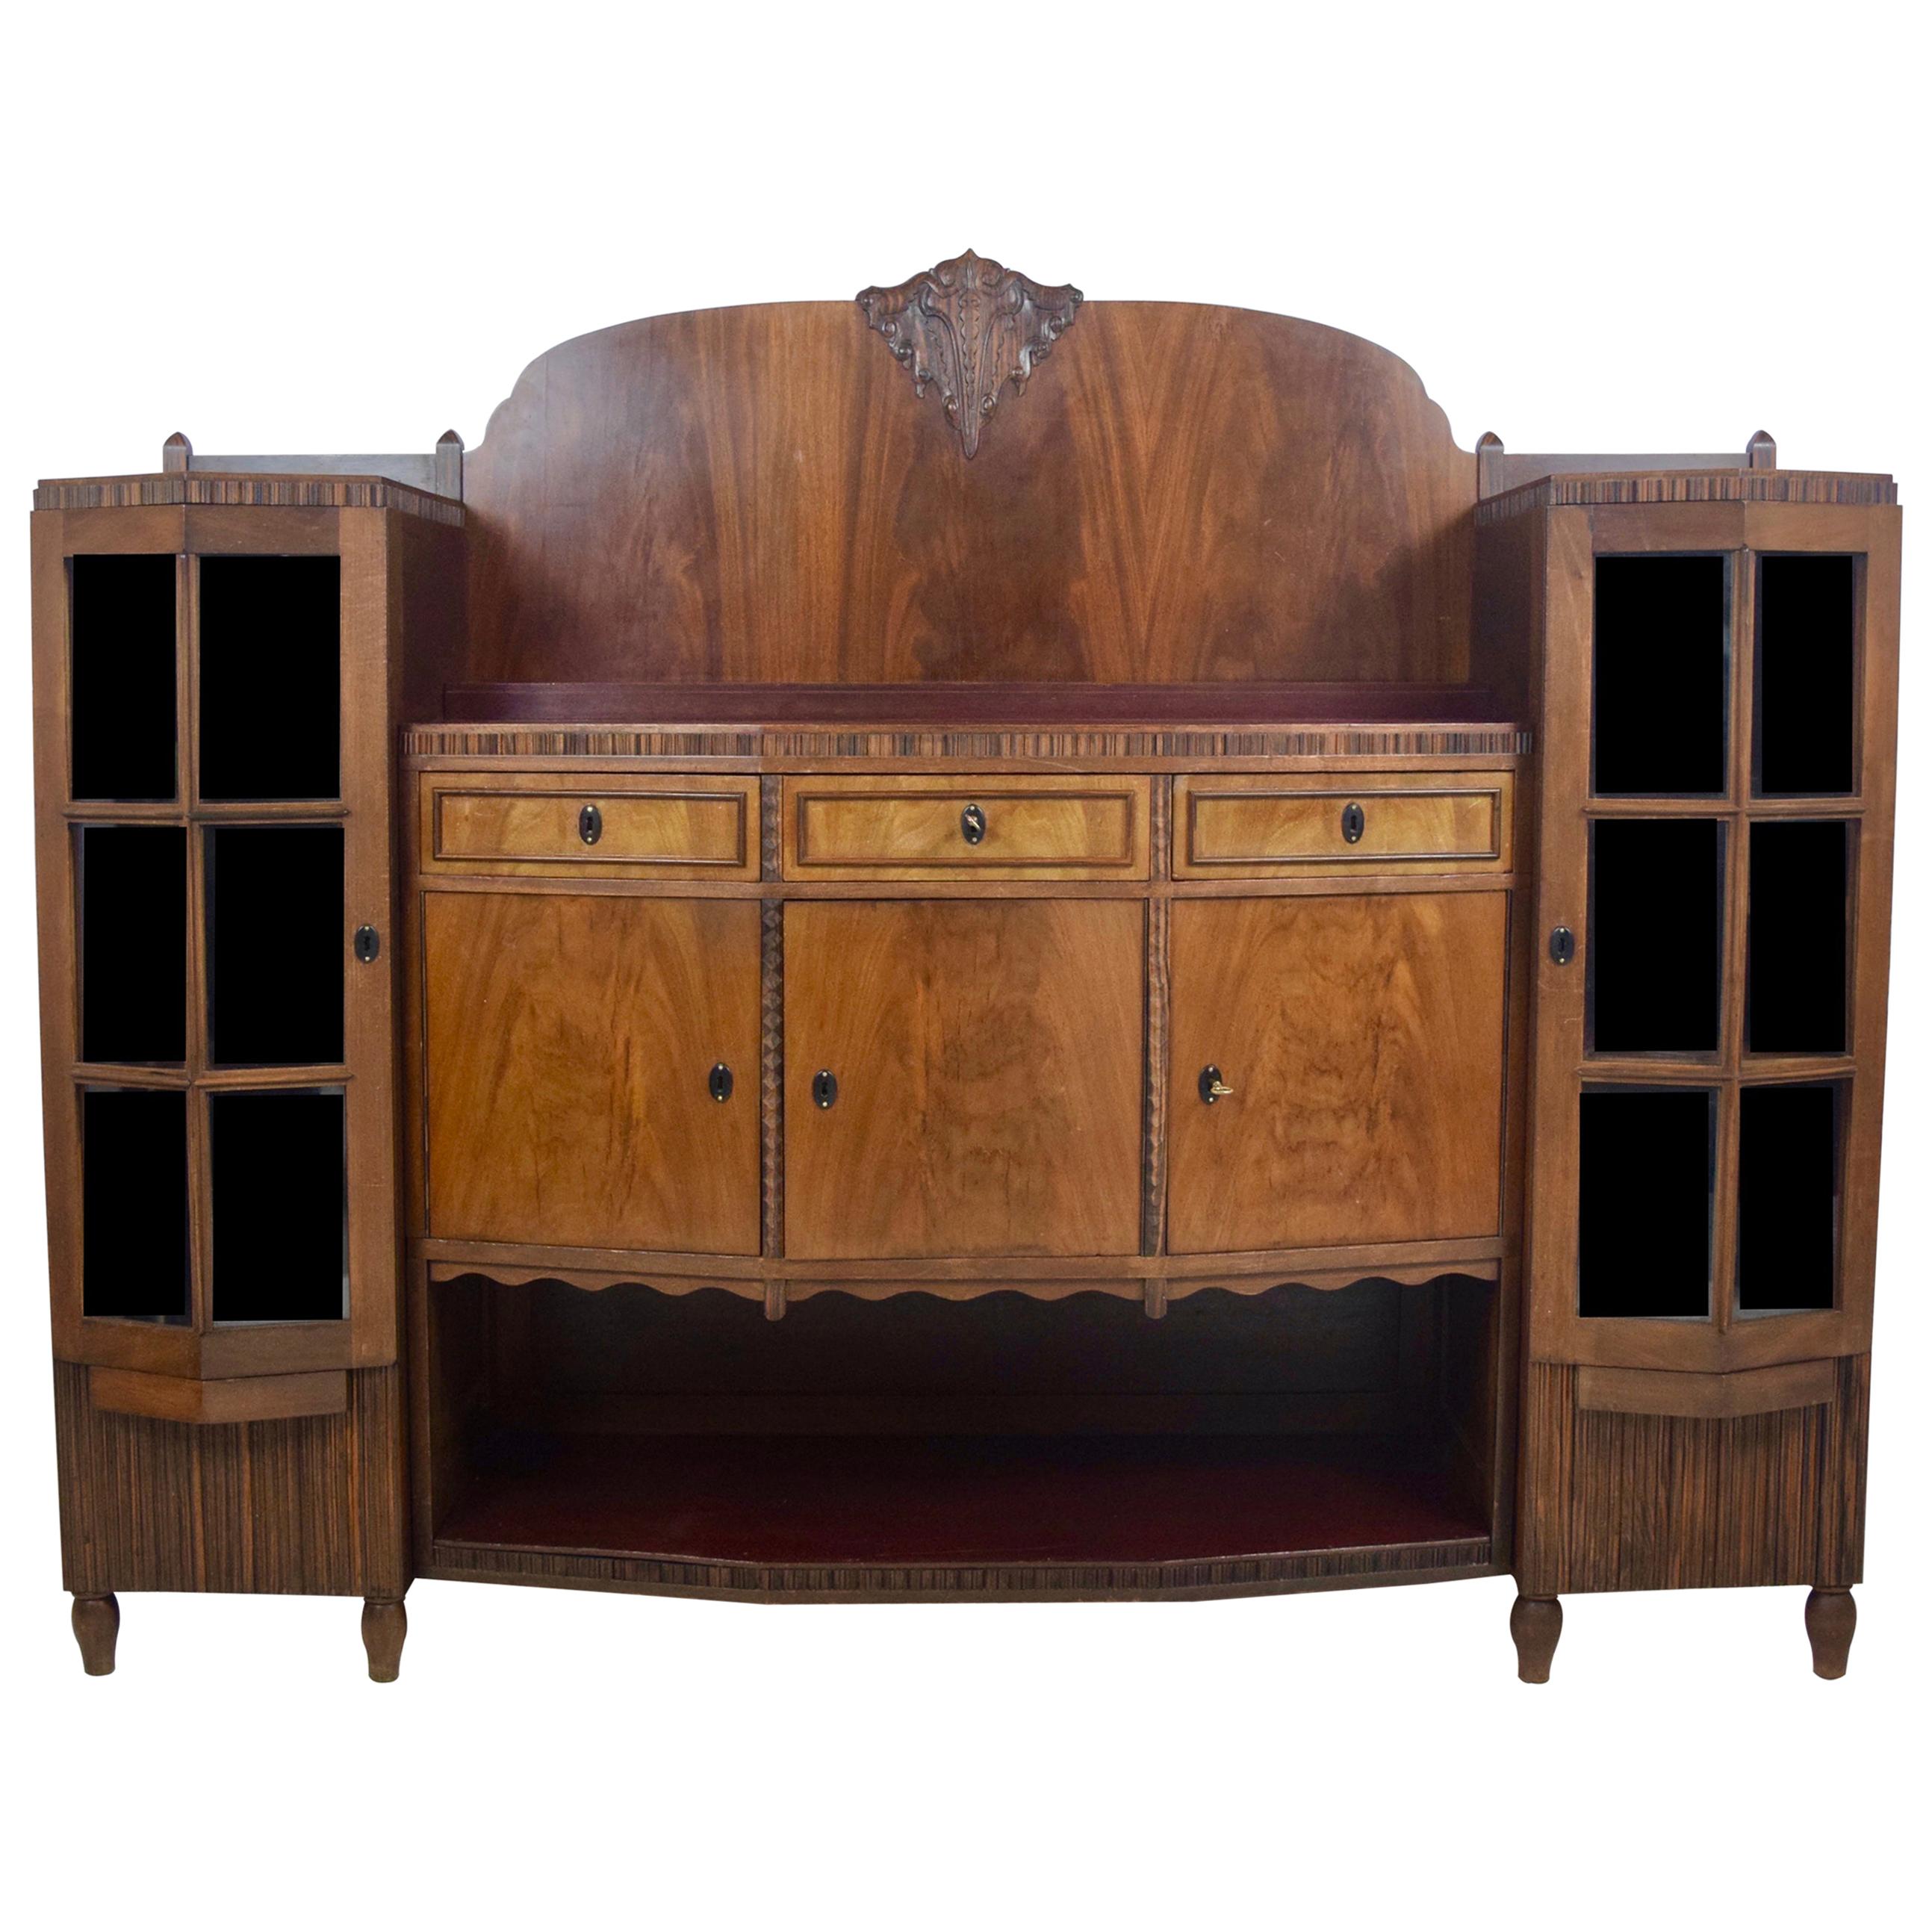 Amsterdam School Bar Cabinet by J. Th. Drilling, 1924, the Netherlands